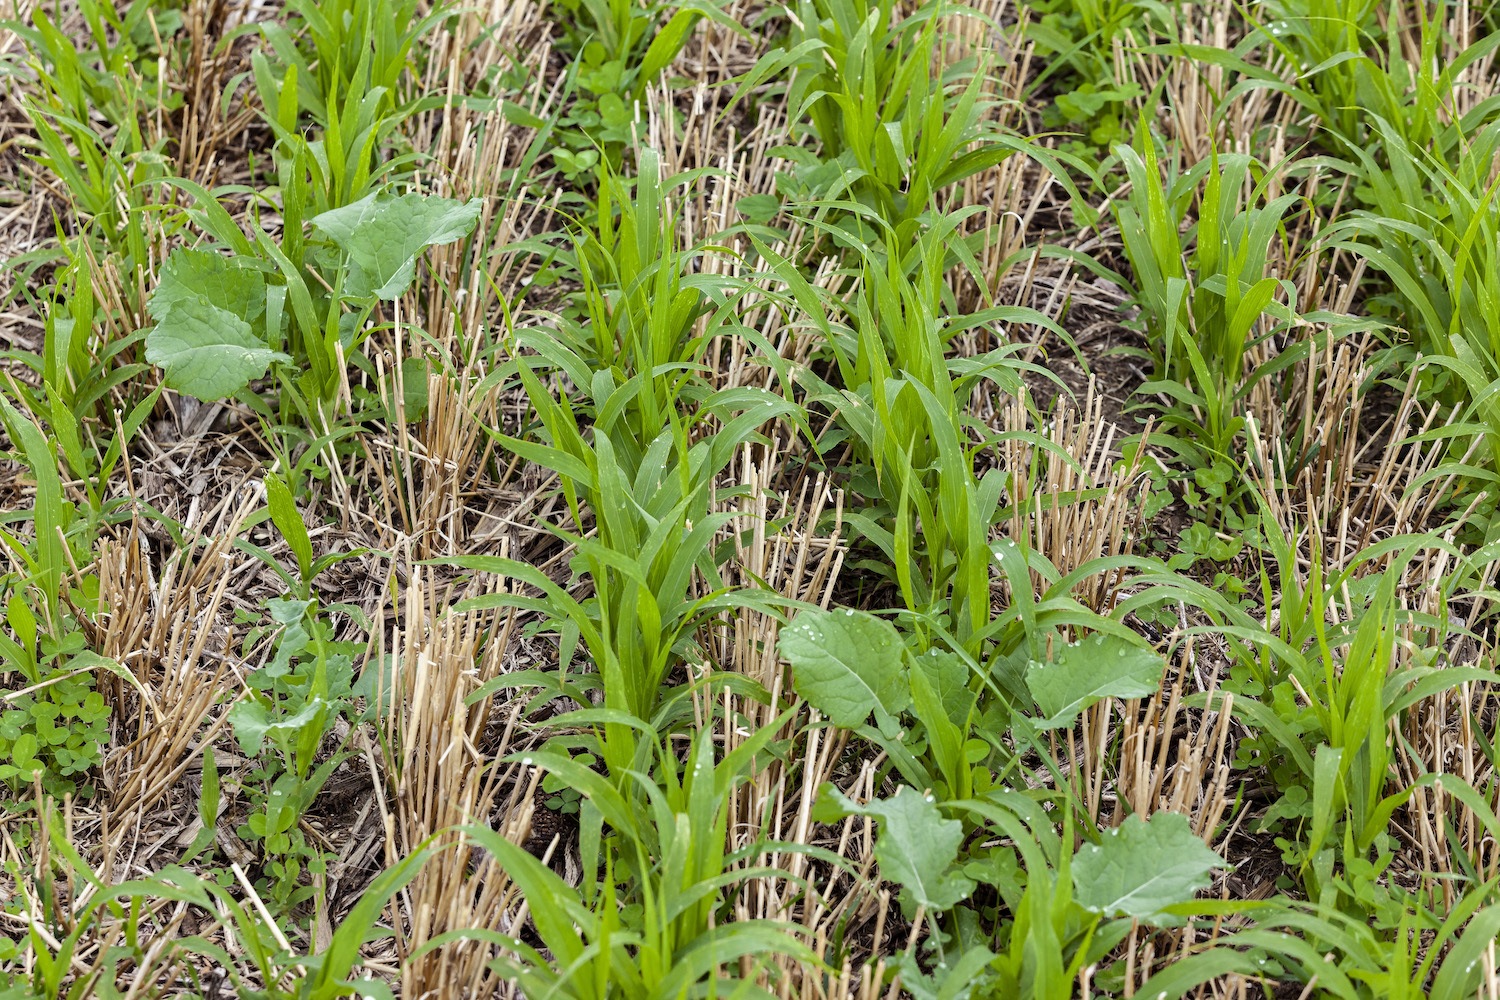 Close-up of cover crops growing between rows winter wheat stubble. January 2021